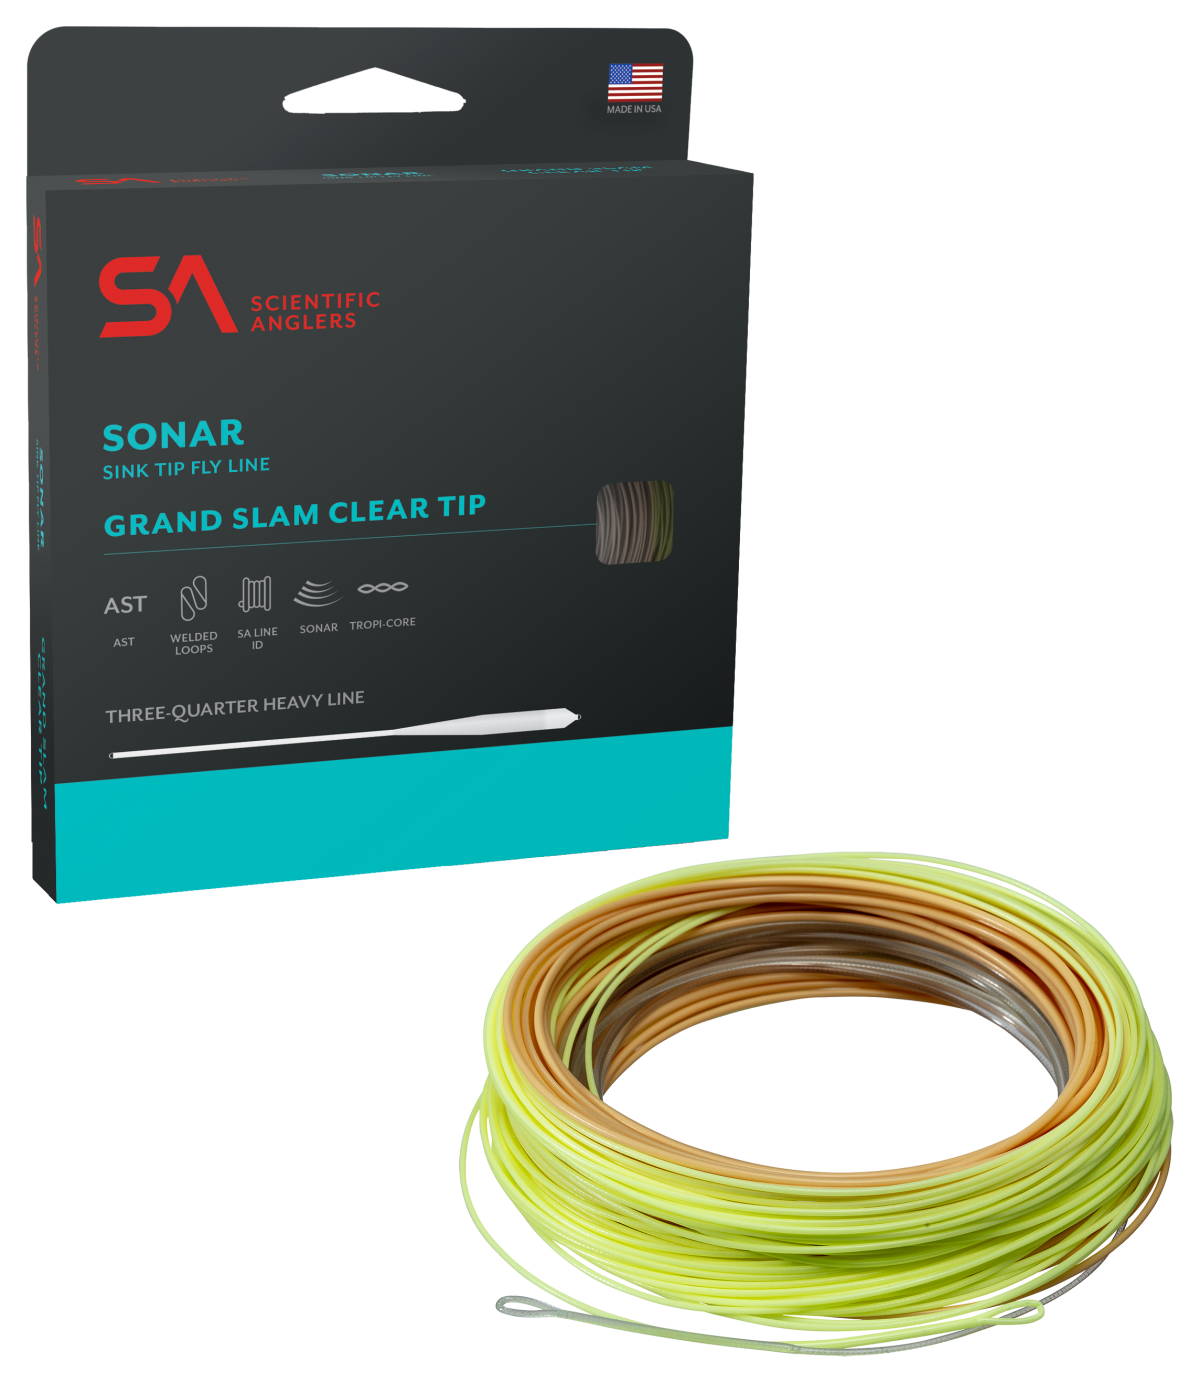 Scientific Anglers Sonar Grand Slam Clear-Tip Fly Line - 9 lb.